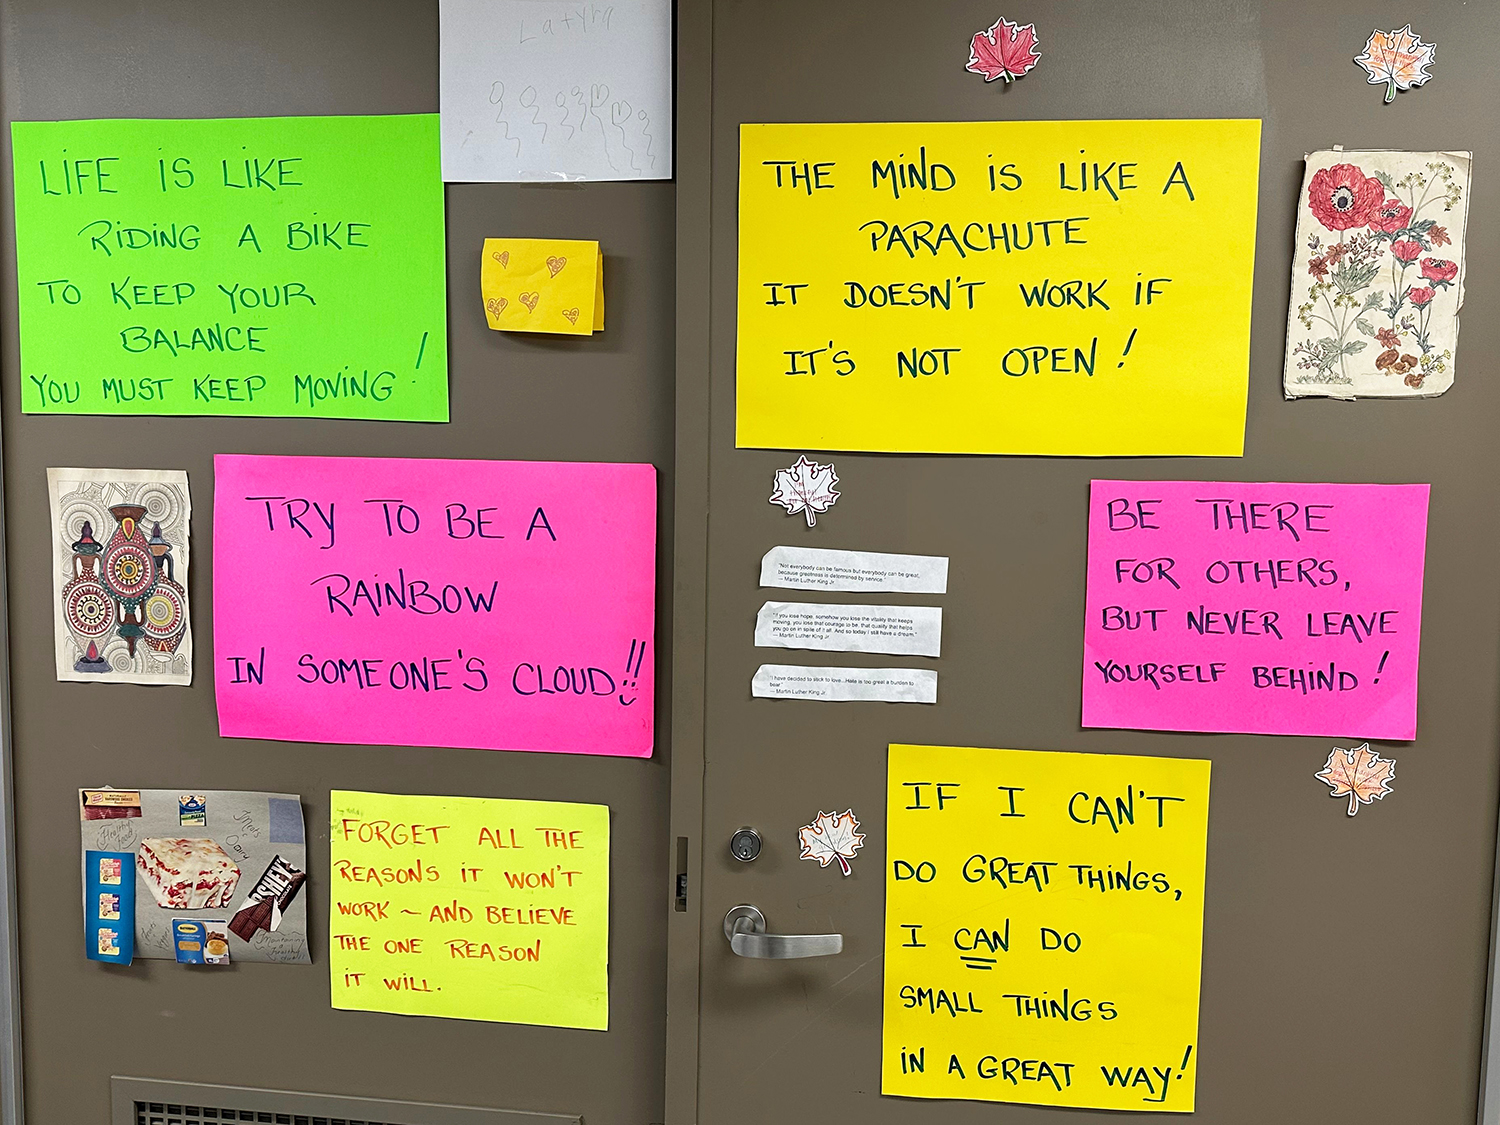 Several inspirational phrases are written on yellow, pink, and green sheets of paper, adding a colorful touch to a set of grayish-brown double doors. The sayings include, “Try to be a rainbow in someone’s cloud,” “Forget all the reasons it won’t work—and believe the one reason it will,” and “Be there for others, but never leave yourself behind.”